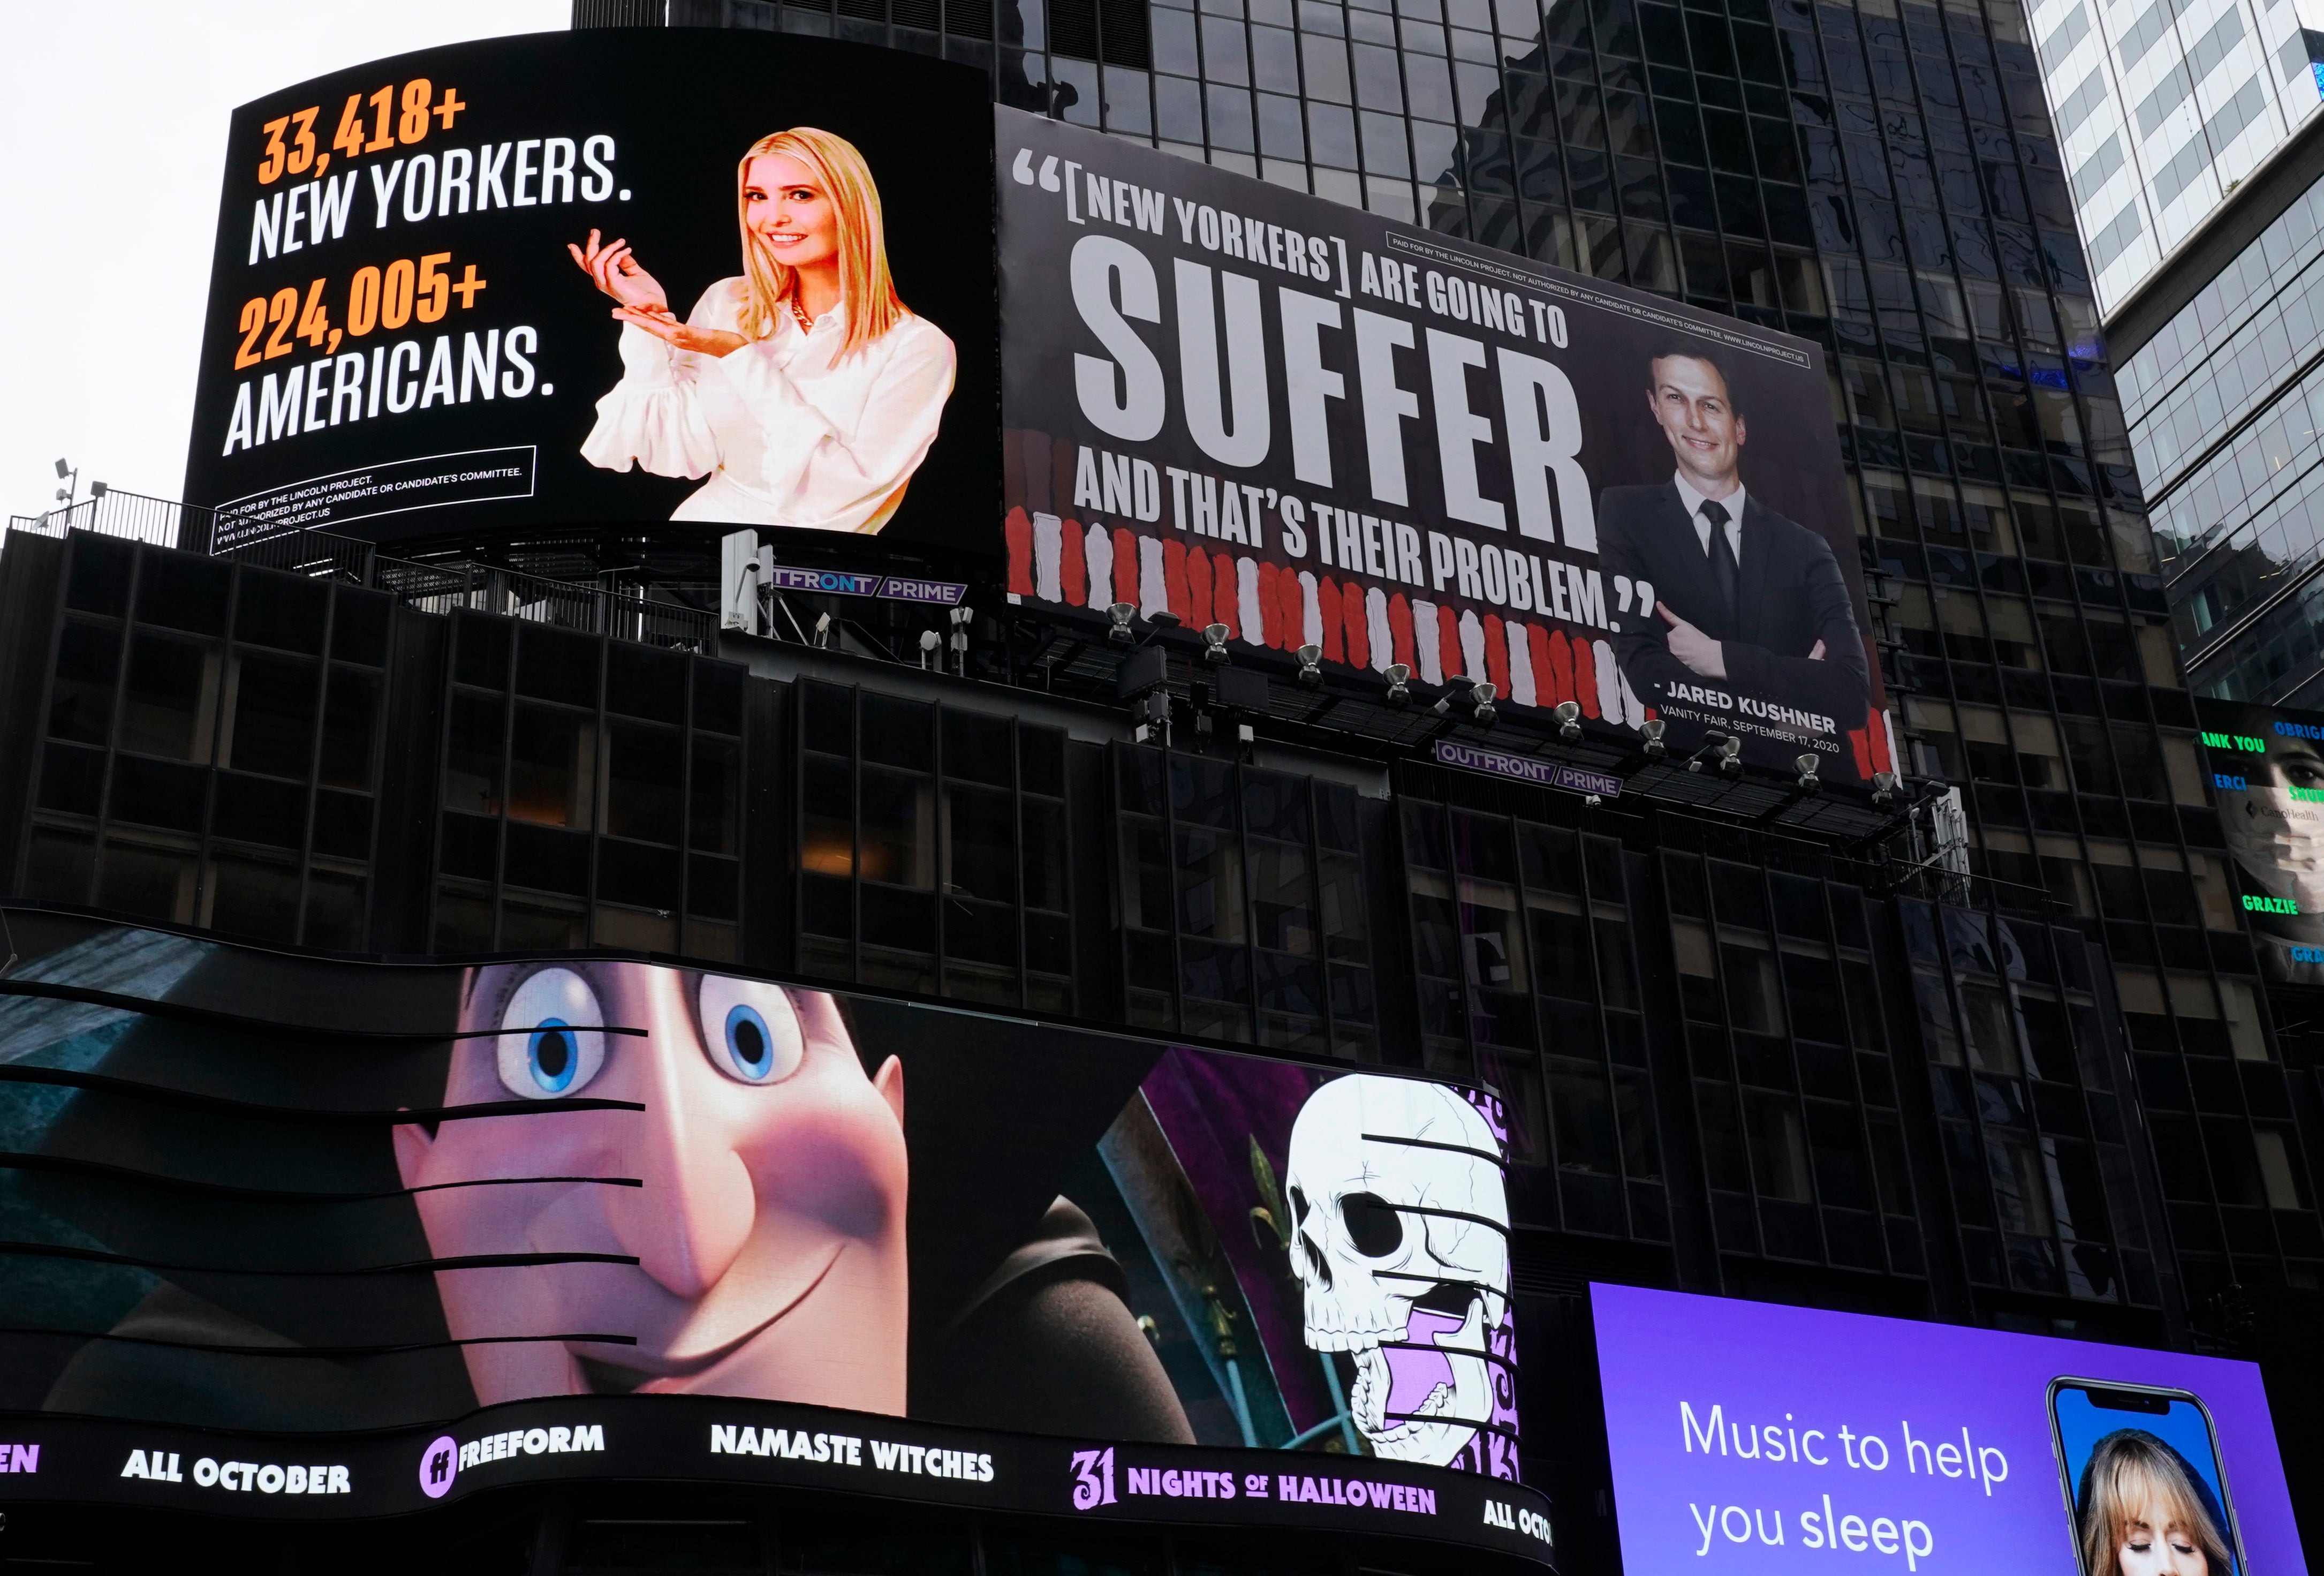 In Times Square, billboards are currently on prominent display savaging Ivanka and Jared